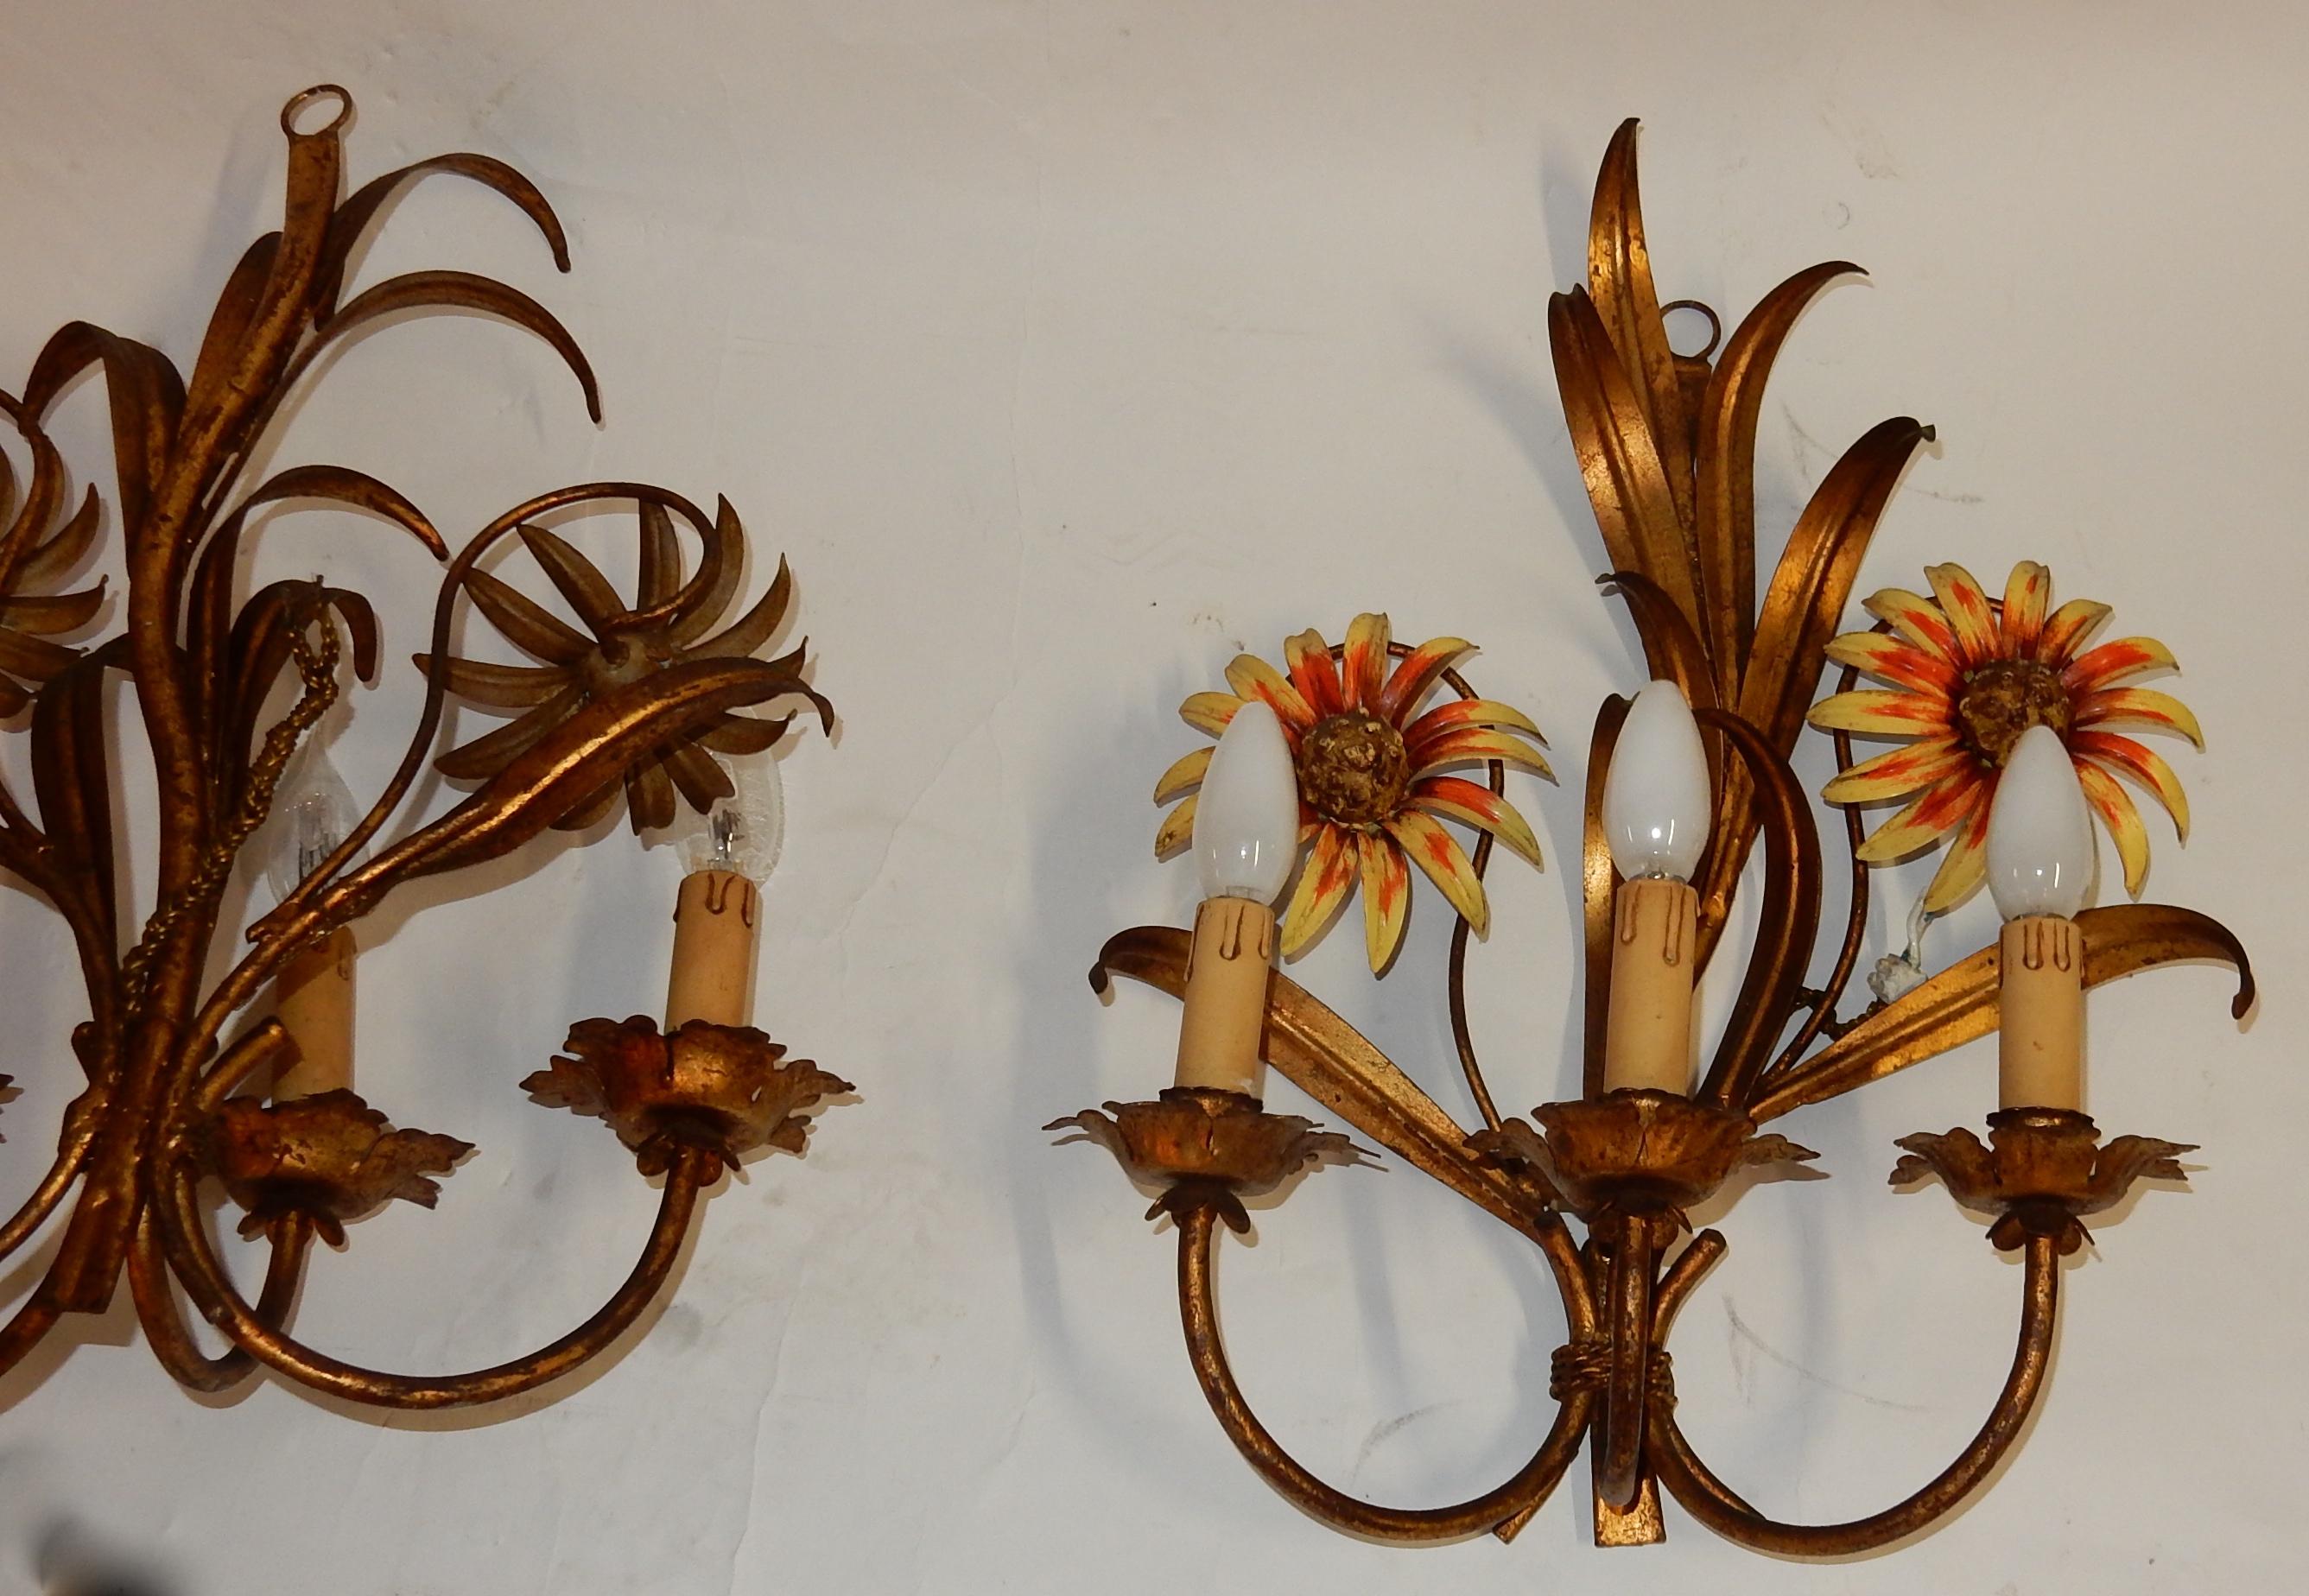 1970 Pair of Painted Metal Sconces with Sunflower Decor 3 Arms of Light In Good Condition For Sale In Paris, FR